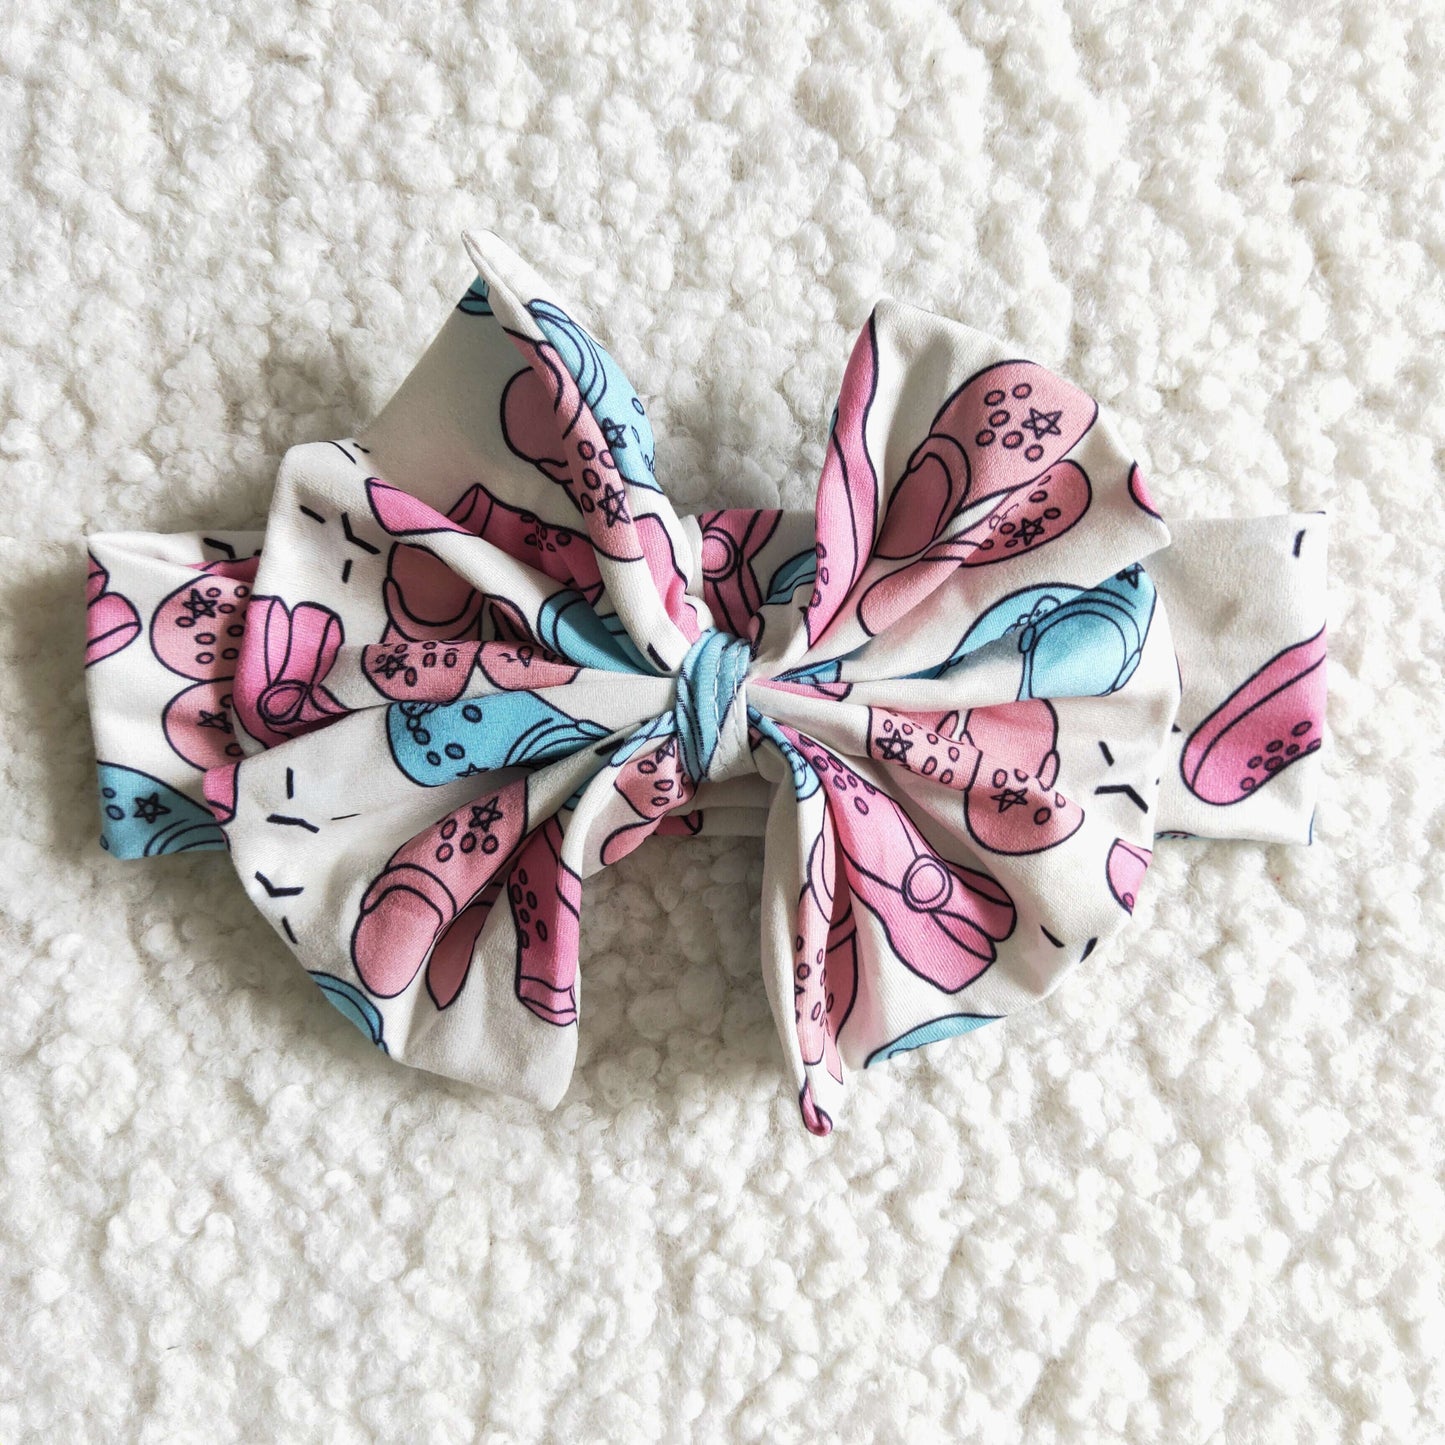 pink bummines sets with bow OUTFITS